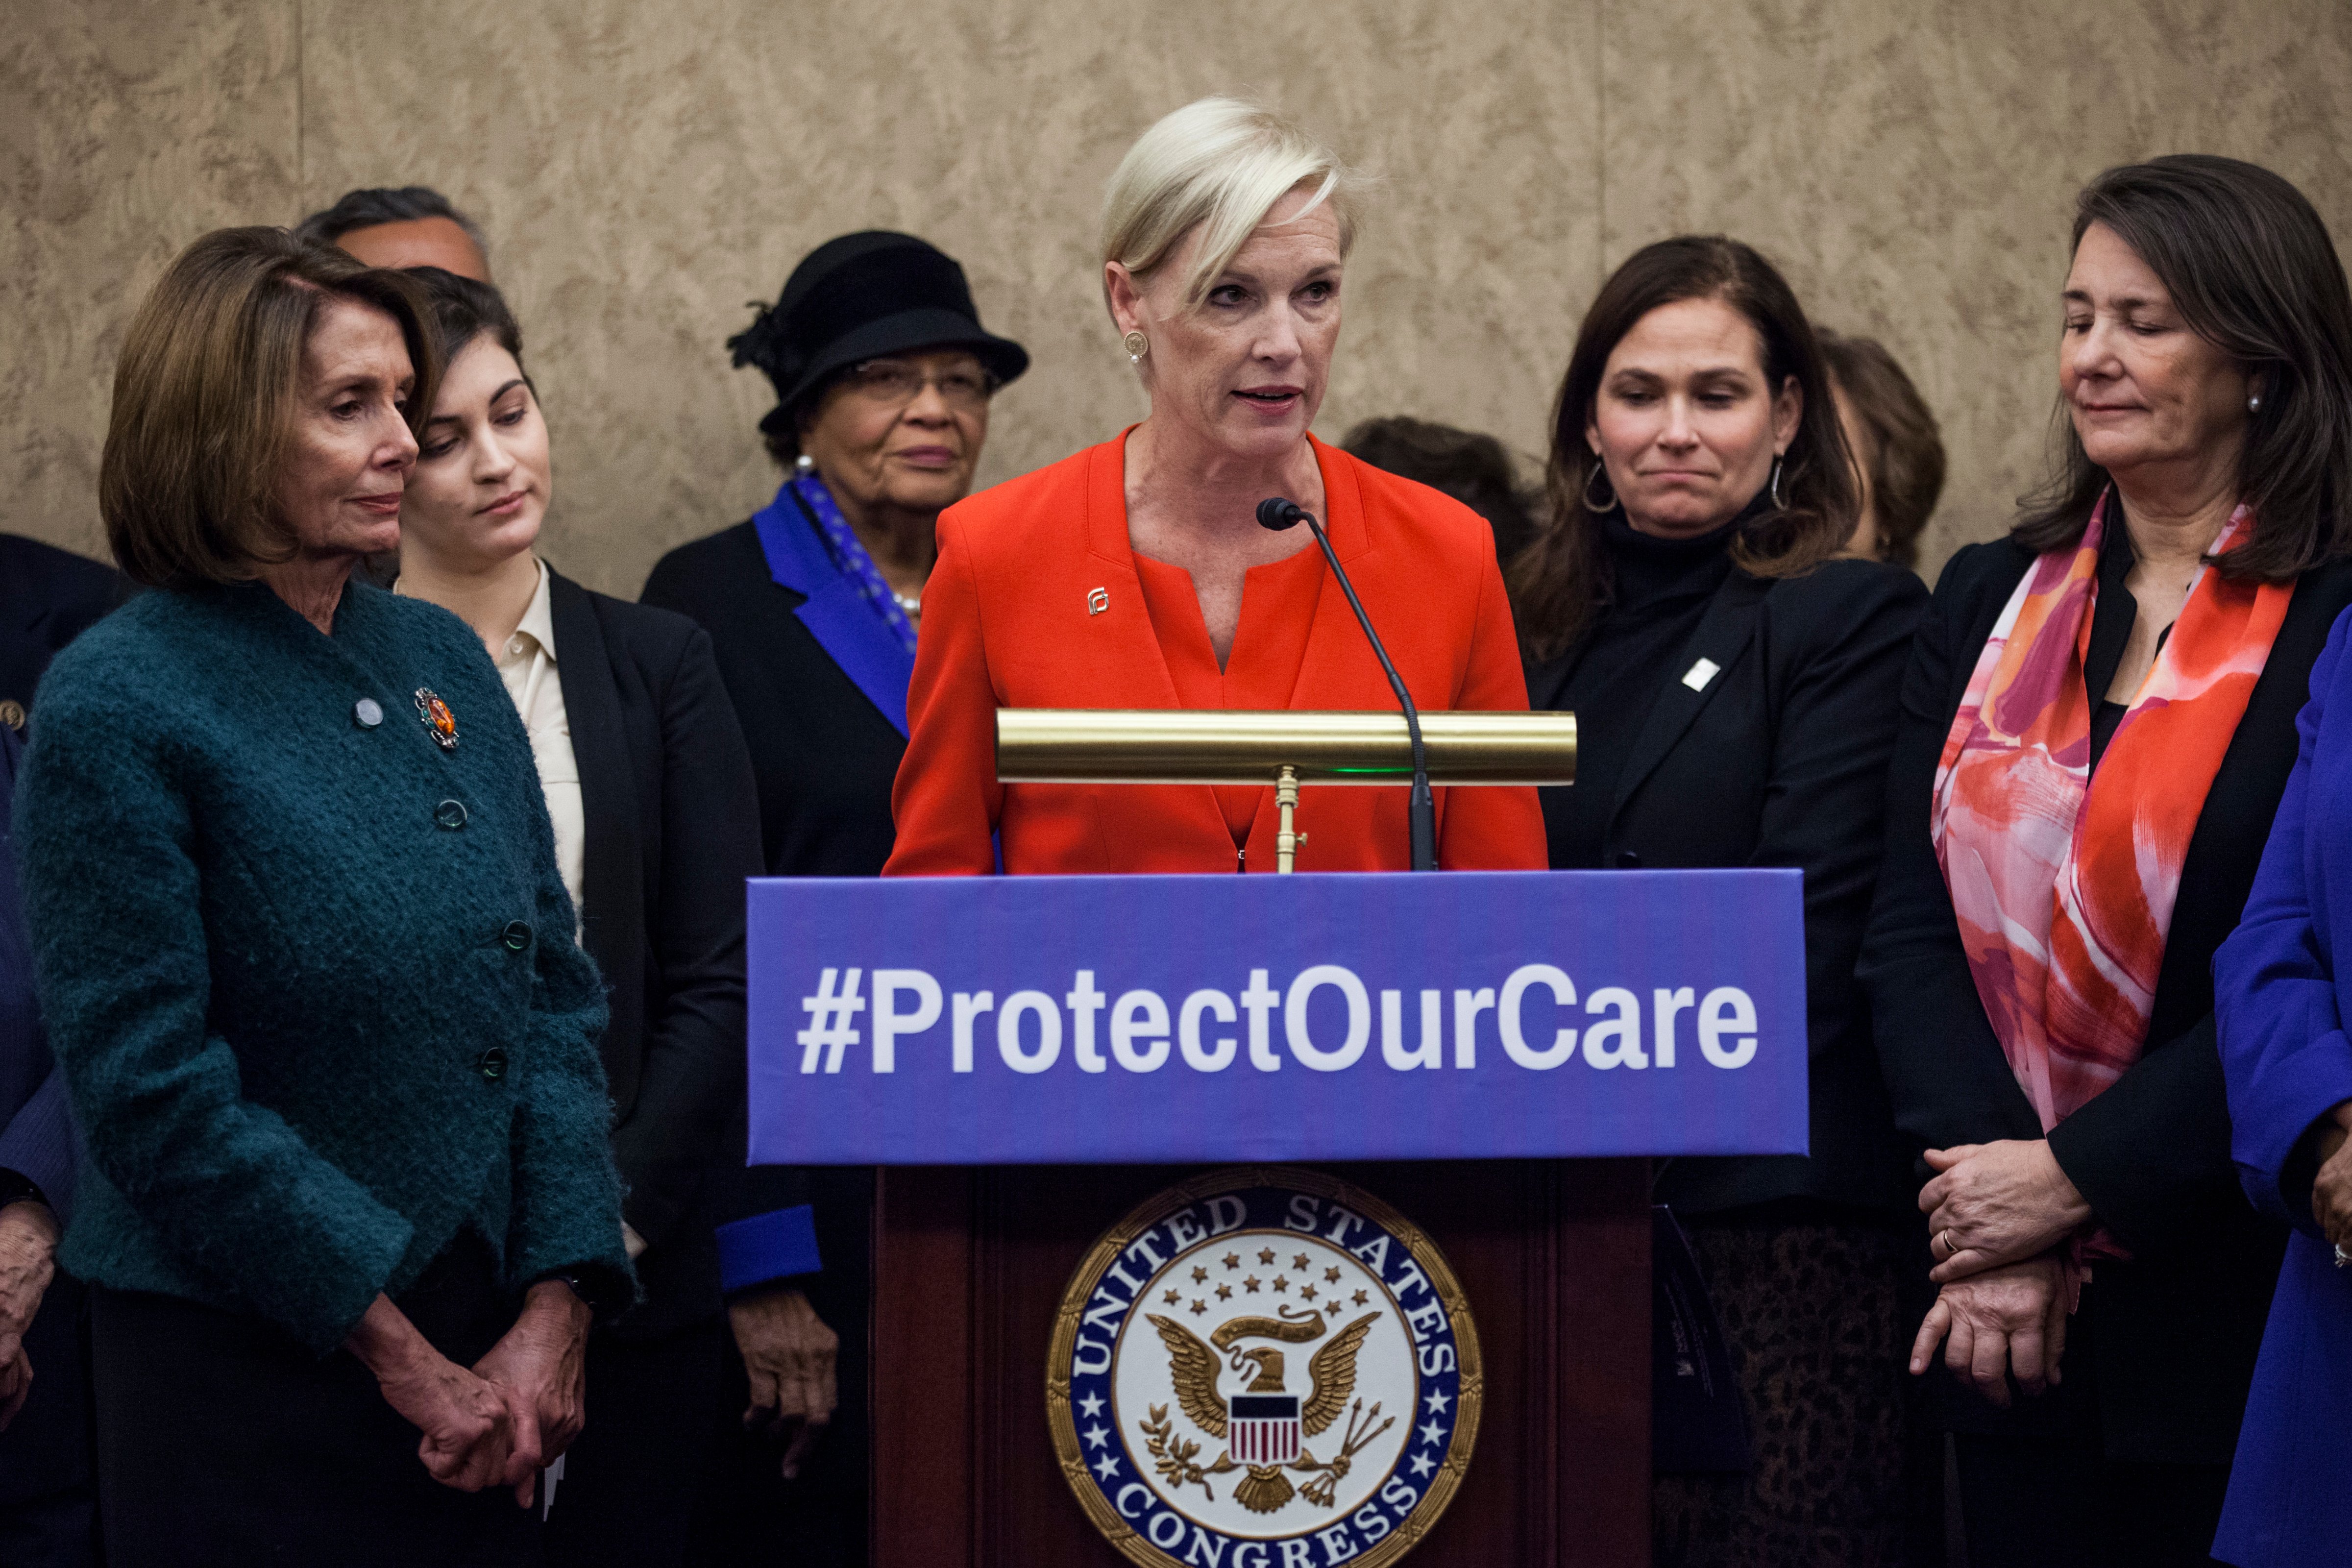 Planned Parenthood president Cecile Richards, joined by House Minority Leader Nancy Pelosi of Calif., left, and Rep. Diana DeGette, D-Colo., right, and others, speaks during a news conference discussing women's health care, Jan. 5, 2017, on Capitol Hill in Washington. (Zach Gibson—AP)